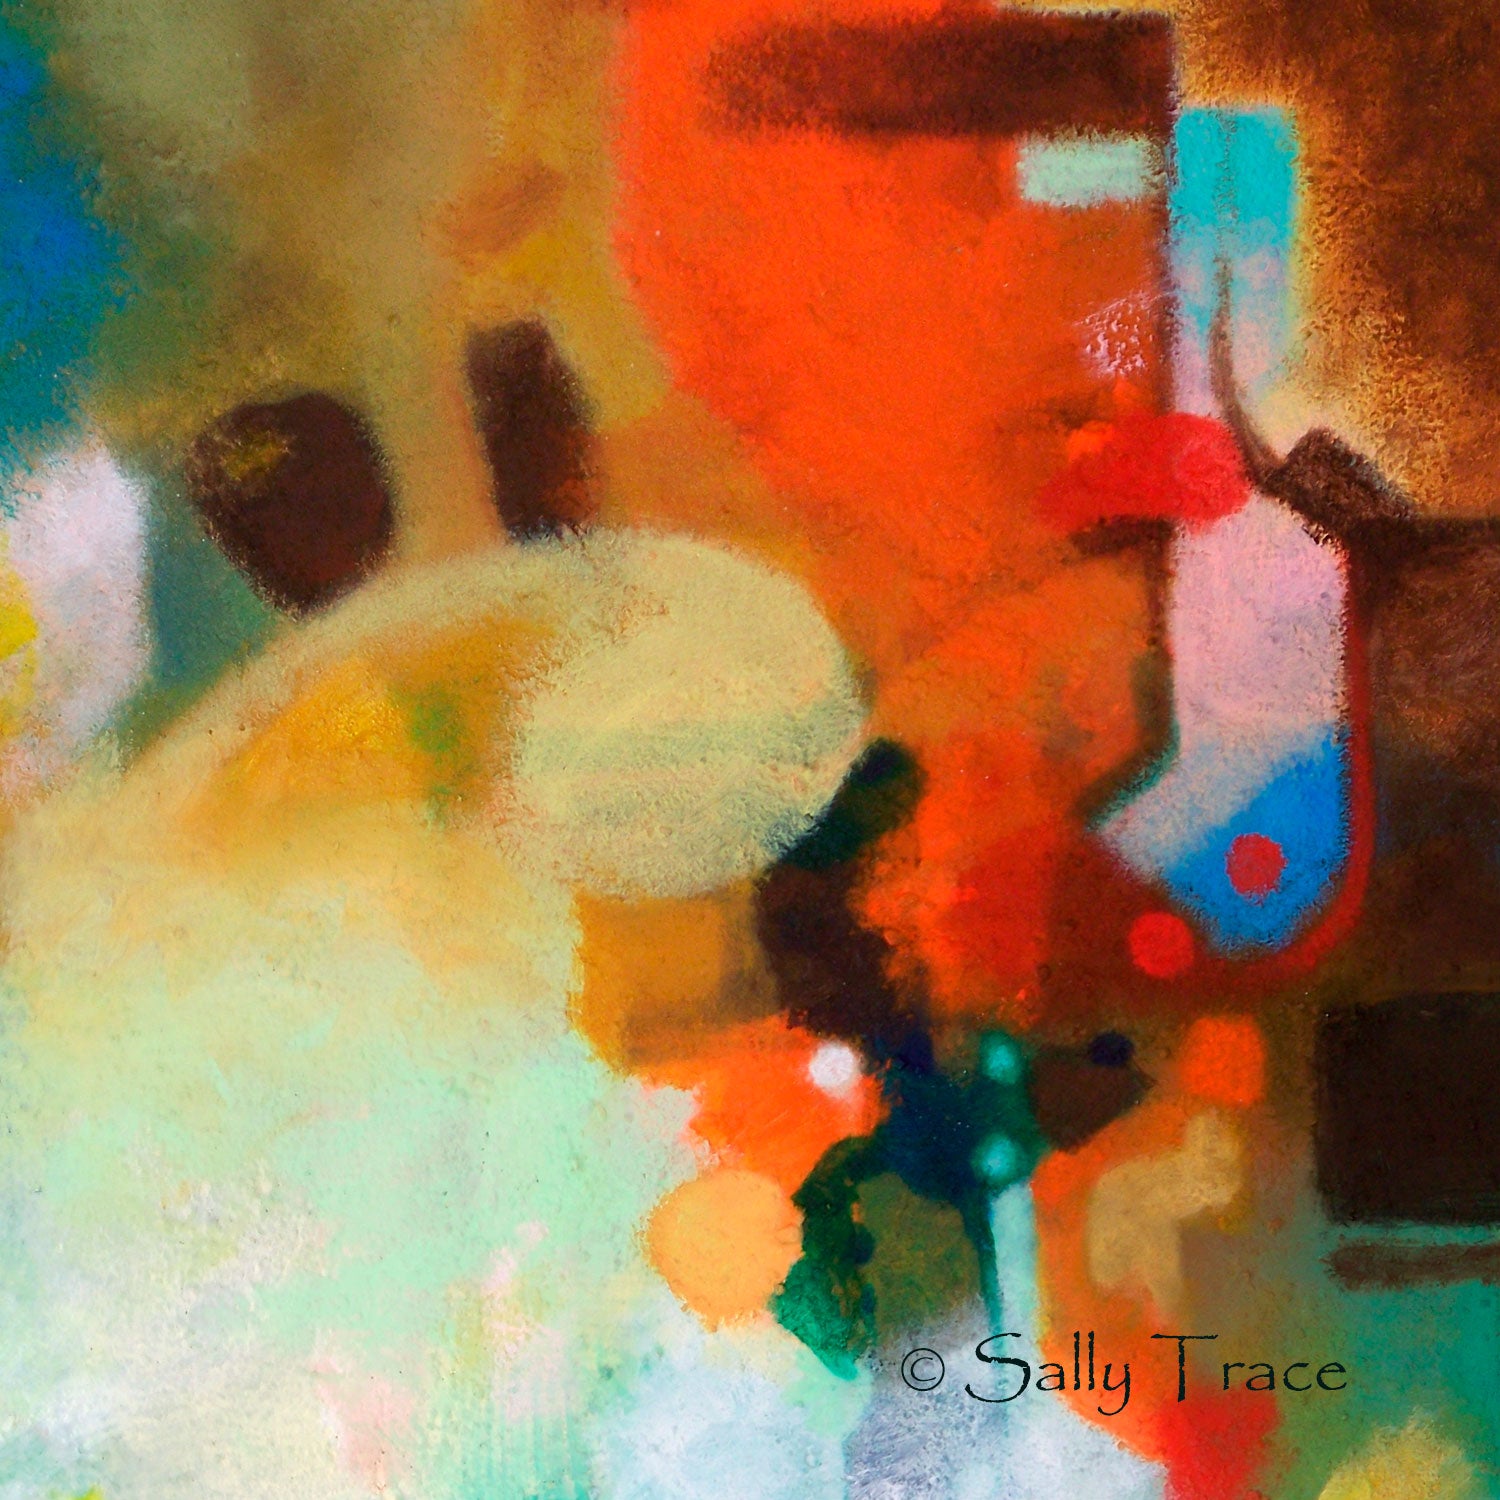 Modern contemporary abstract wall art giclee print by Sally Trace, "Third Level Harmonics", detail